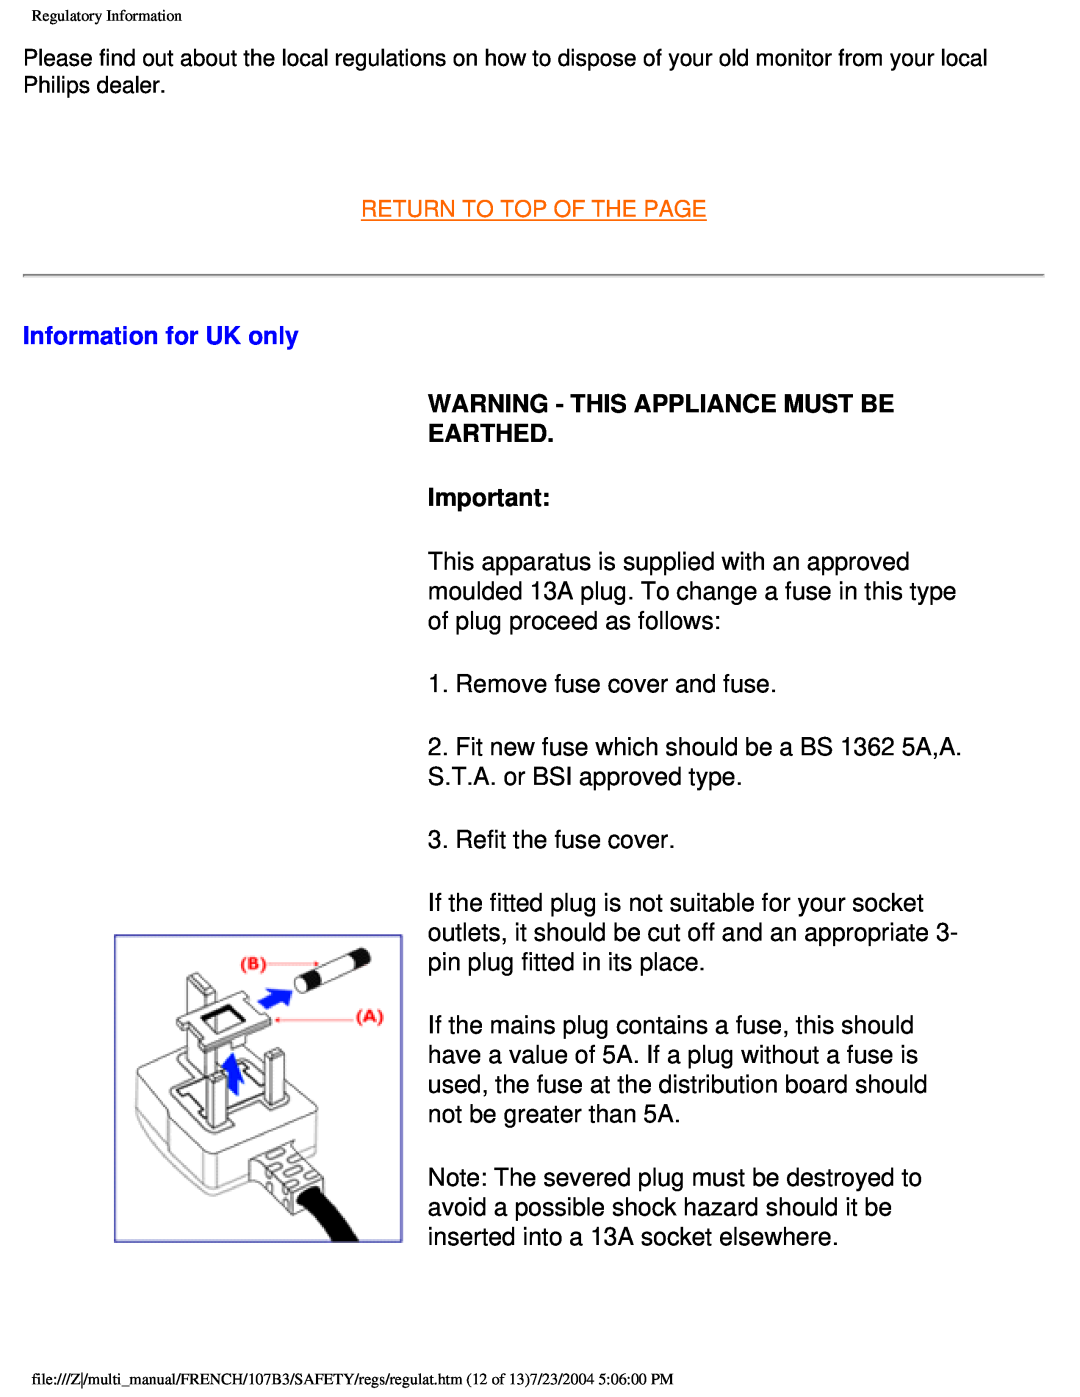 Philips 107B3 user manual Information for UK only, Warning - This Appliance Must Be Earthed 